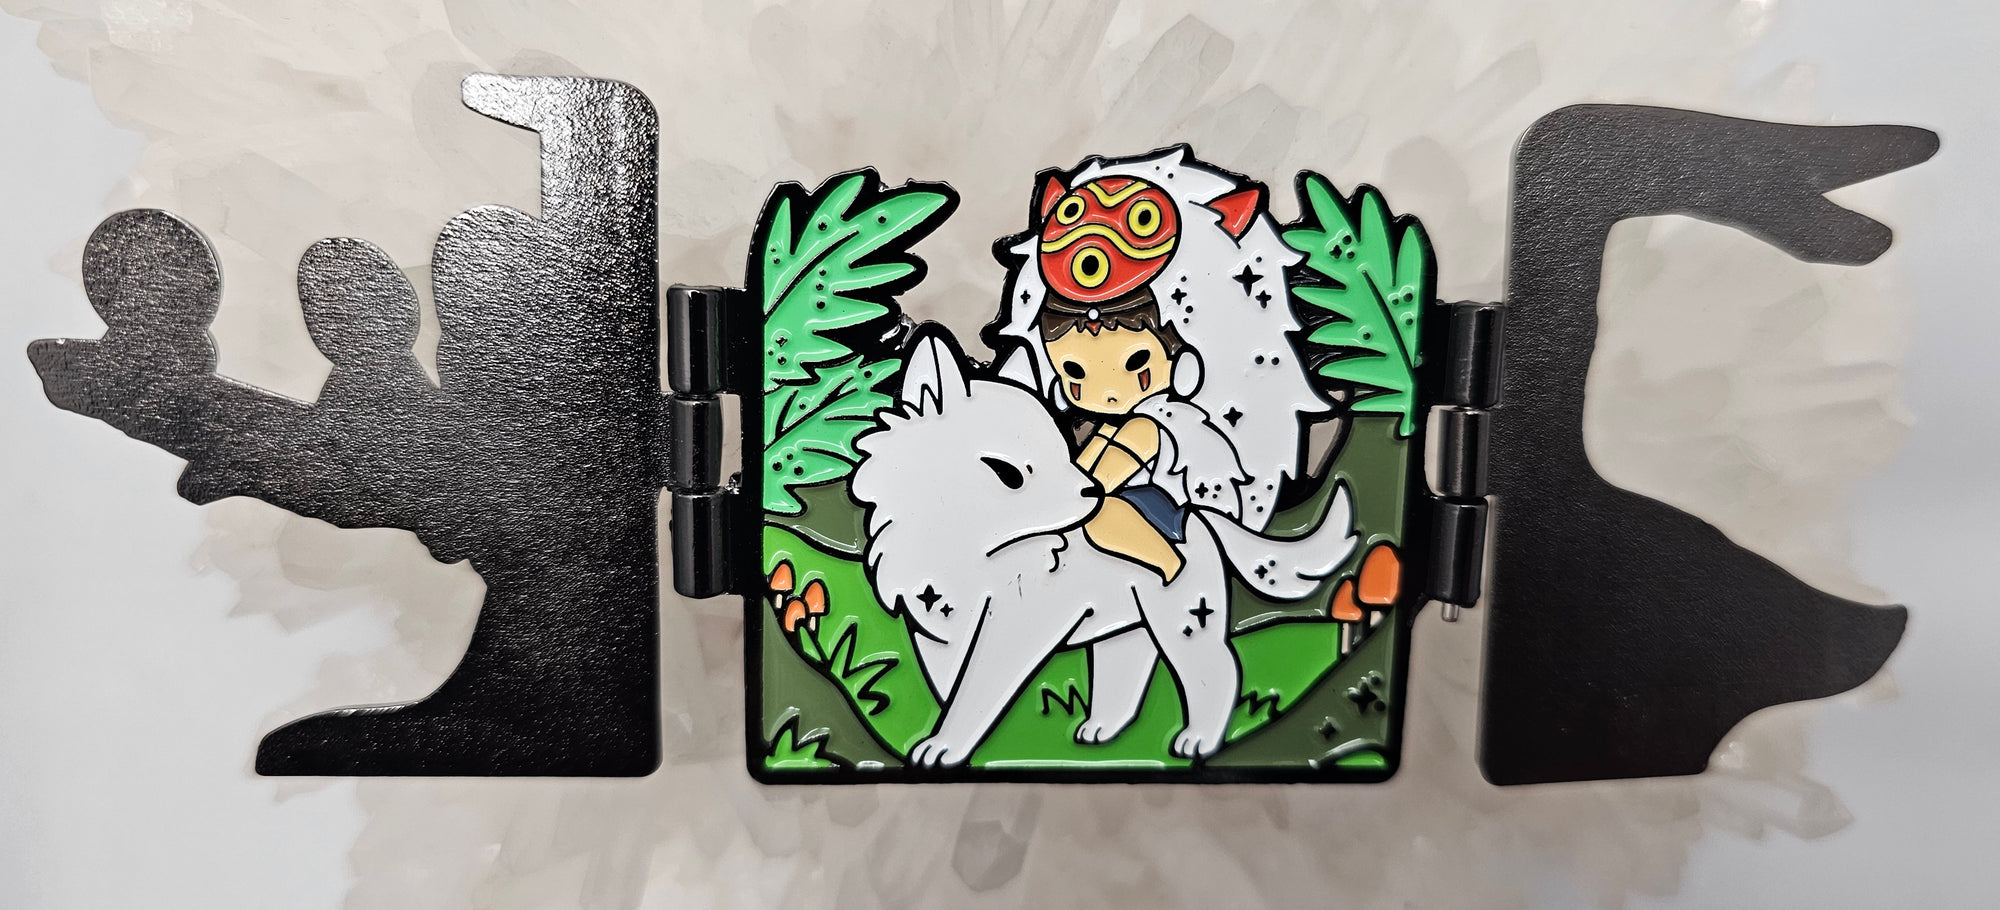 Spirited Magical Forest Anime Away Manga Cartoon Double Hinged Enamel Pins Hat Pins Lapel Pin Brooch Badge Festival Pin